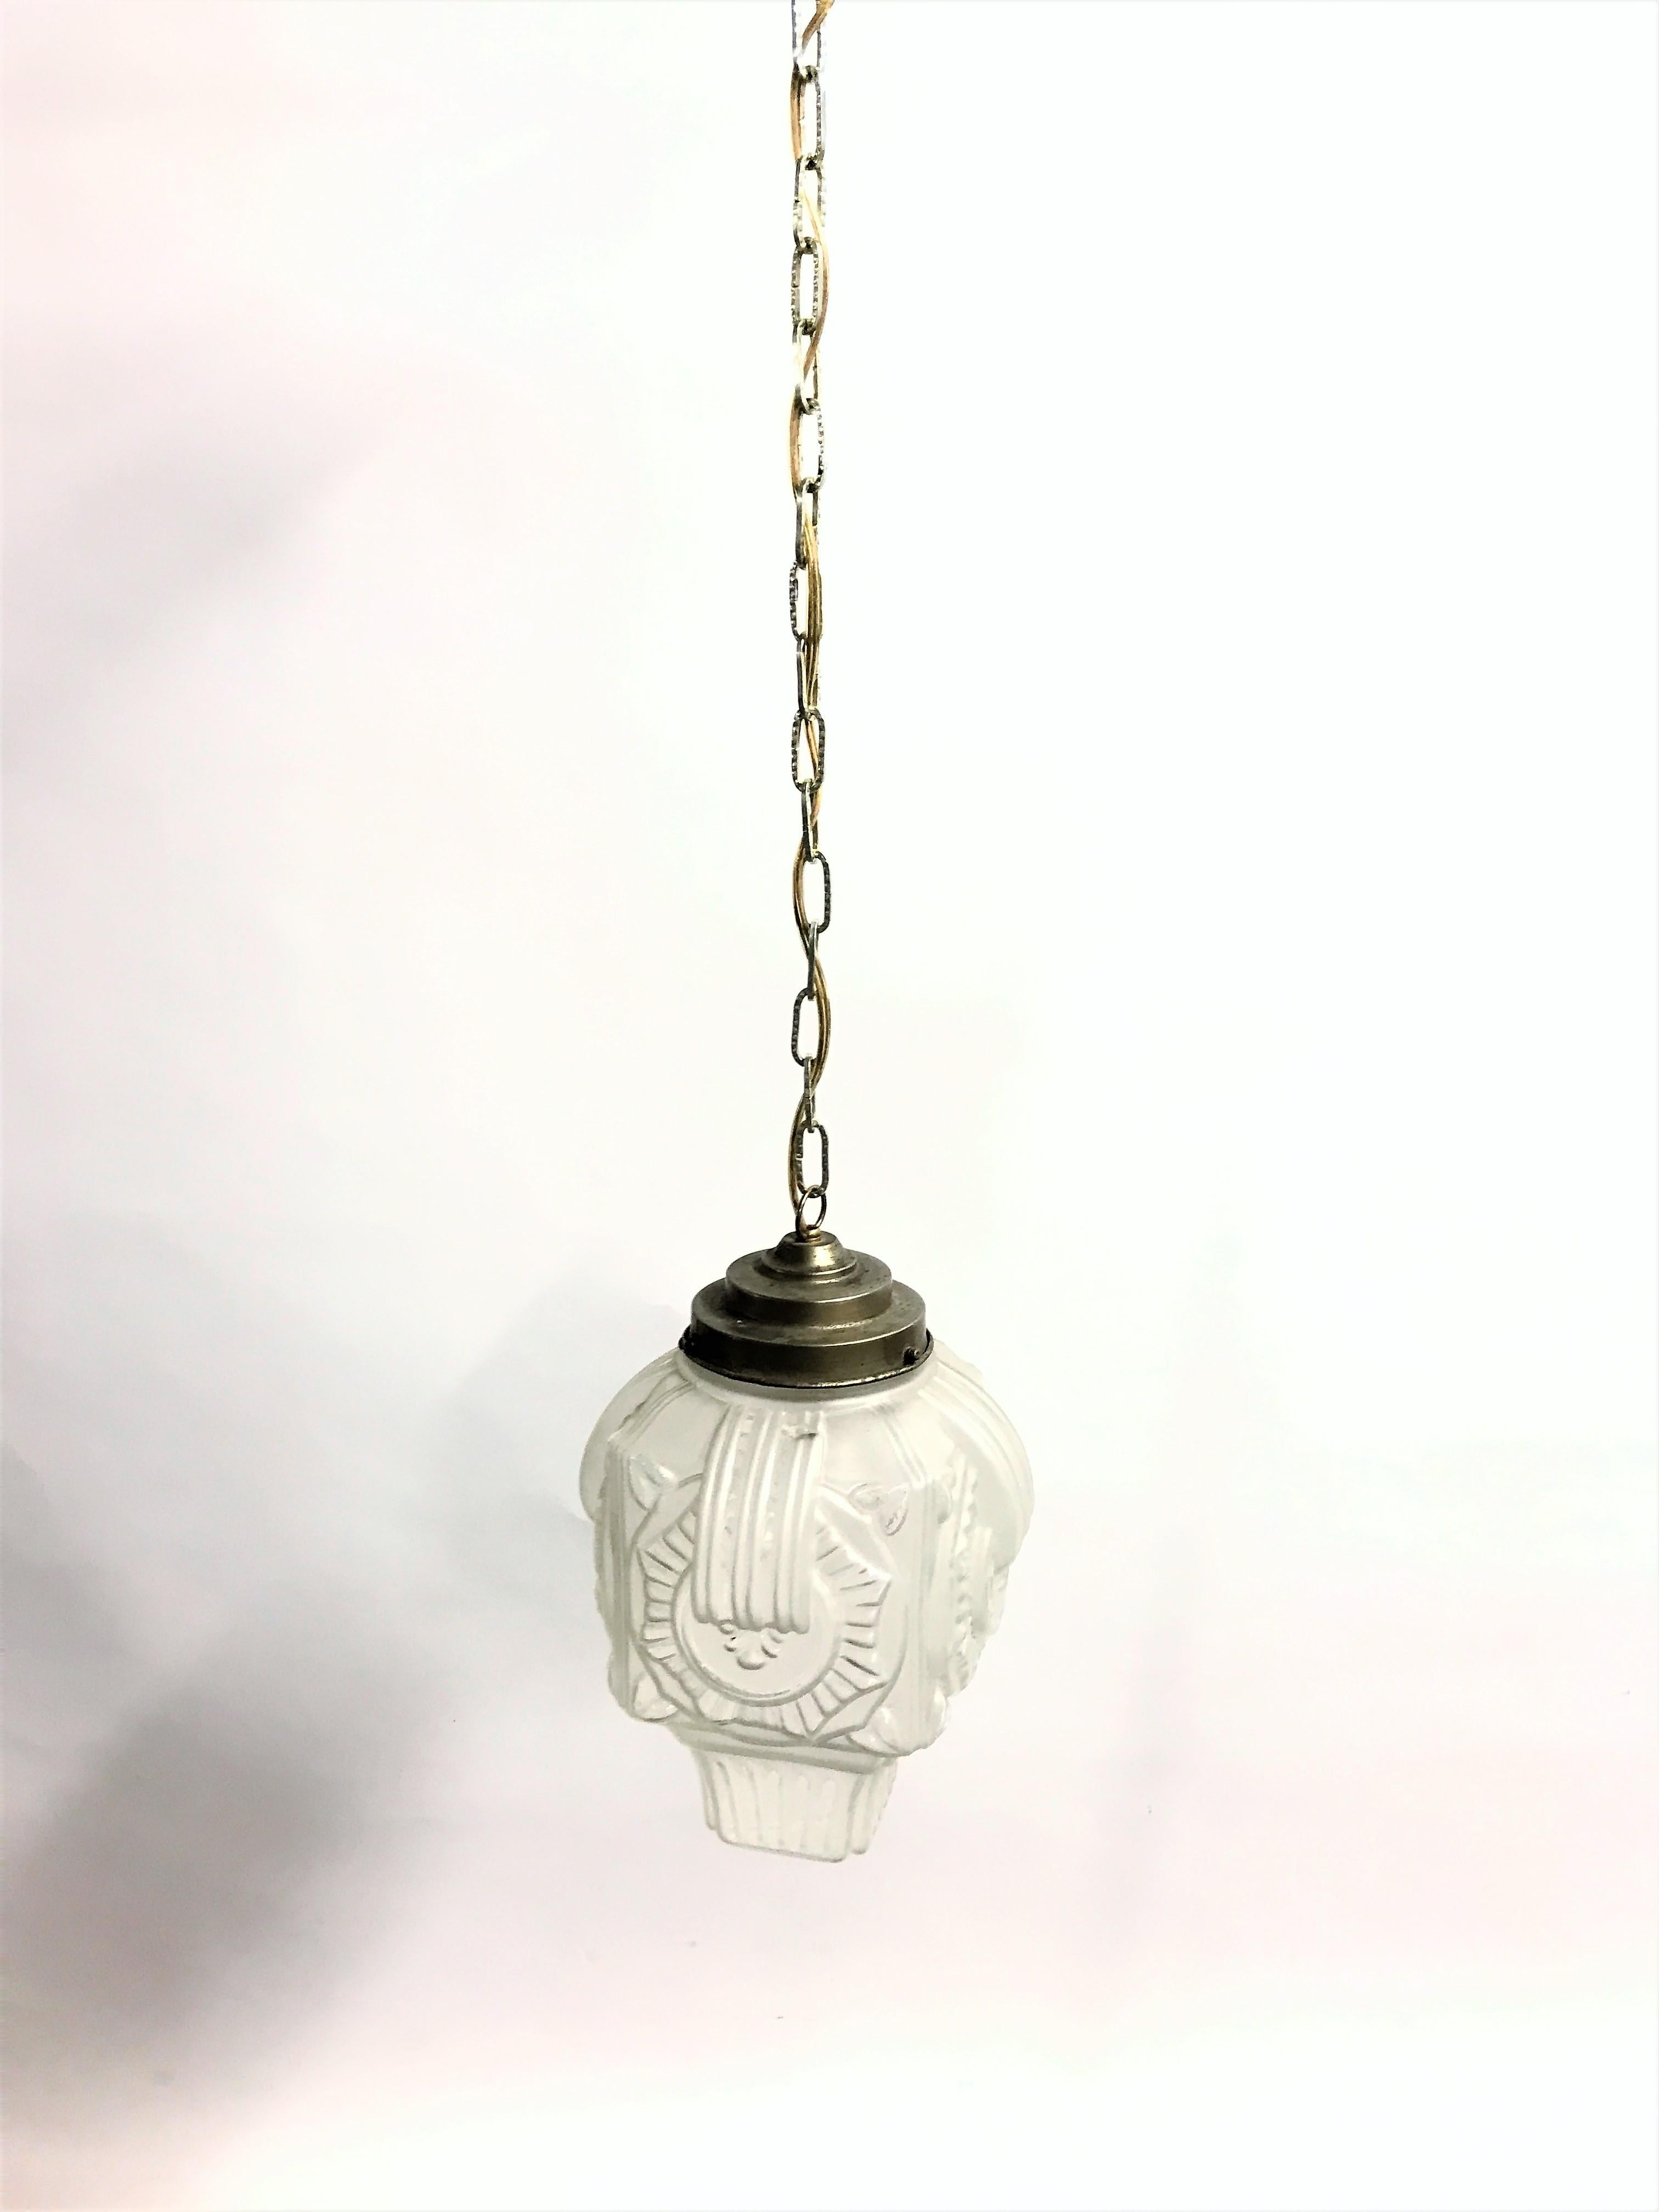 Antique art deco hallway pendant lights.

This glass design lamp is very typical for the art deco era and was widely used to be hung in hallways, offices or larger public places.

The lamp has the original stepped copper shade holder and ceiling